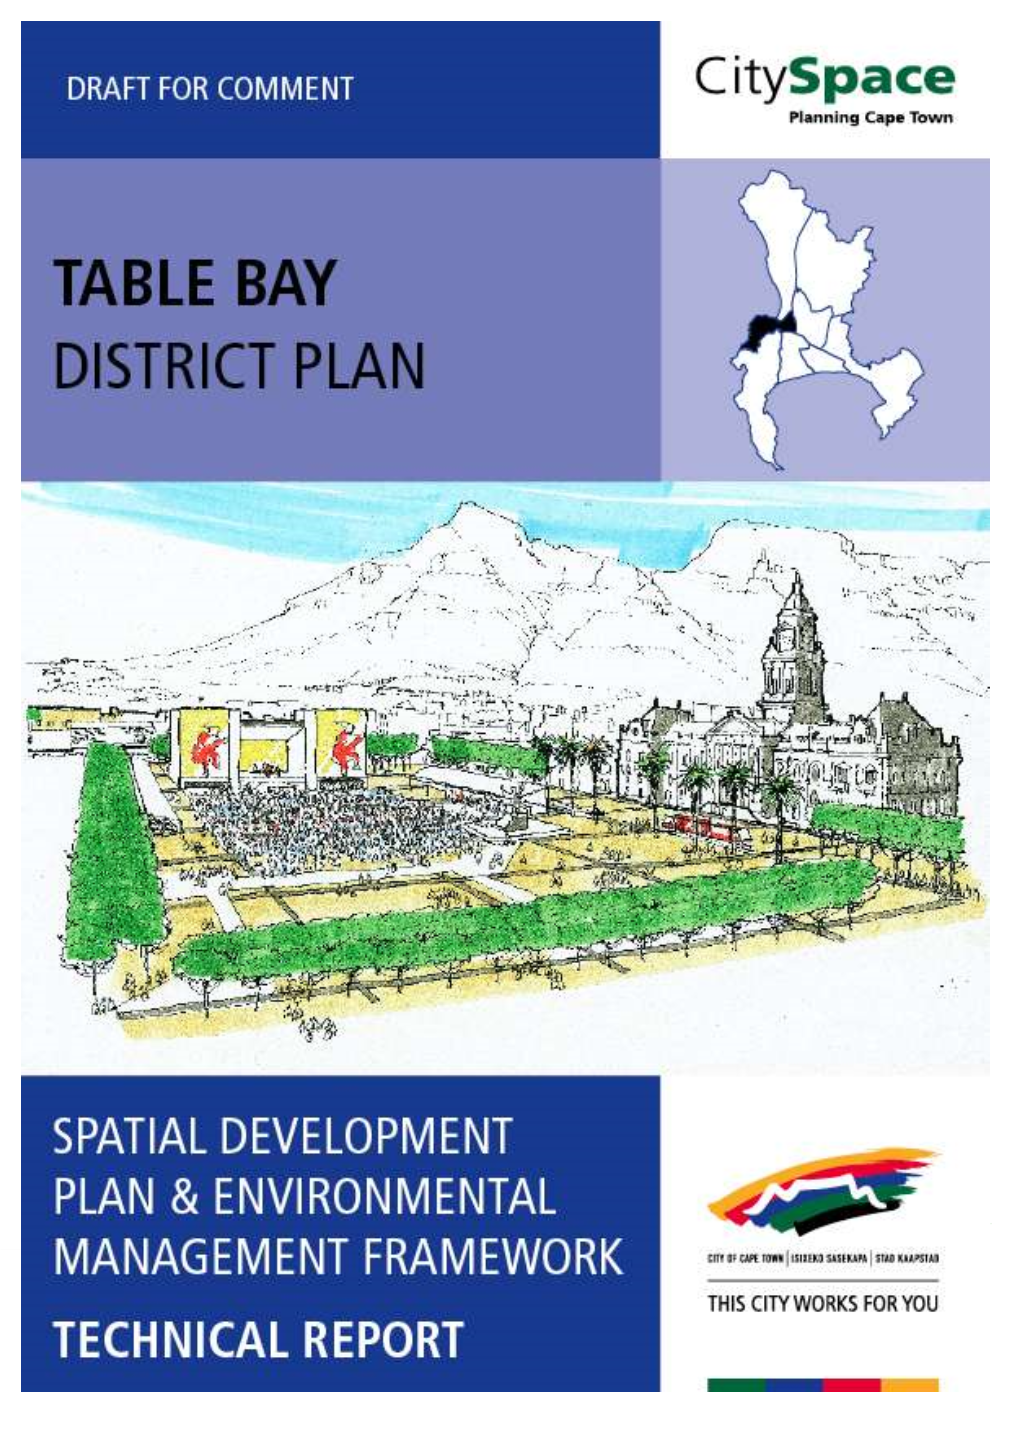 Planning Cape Town